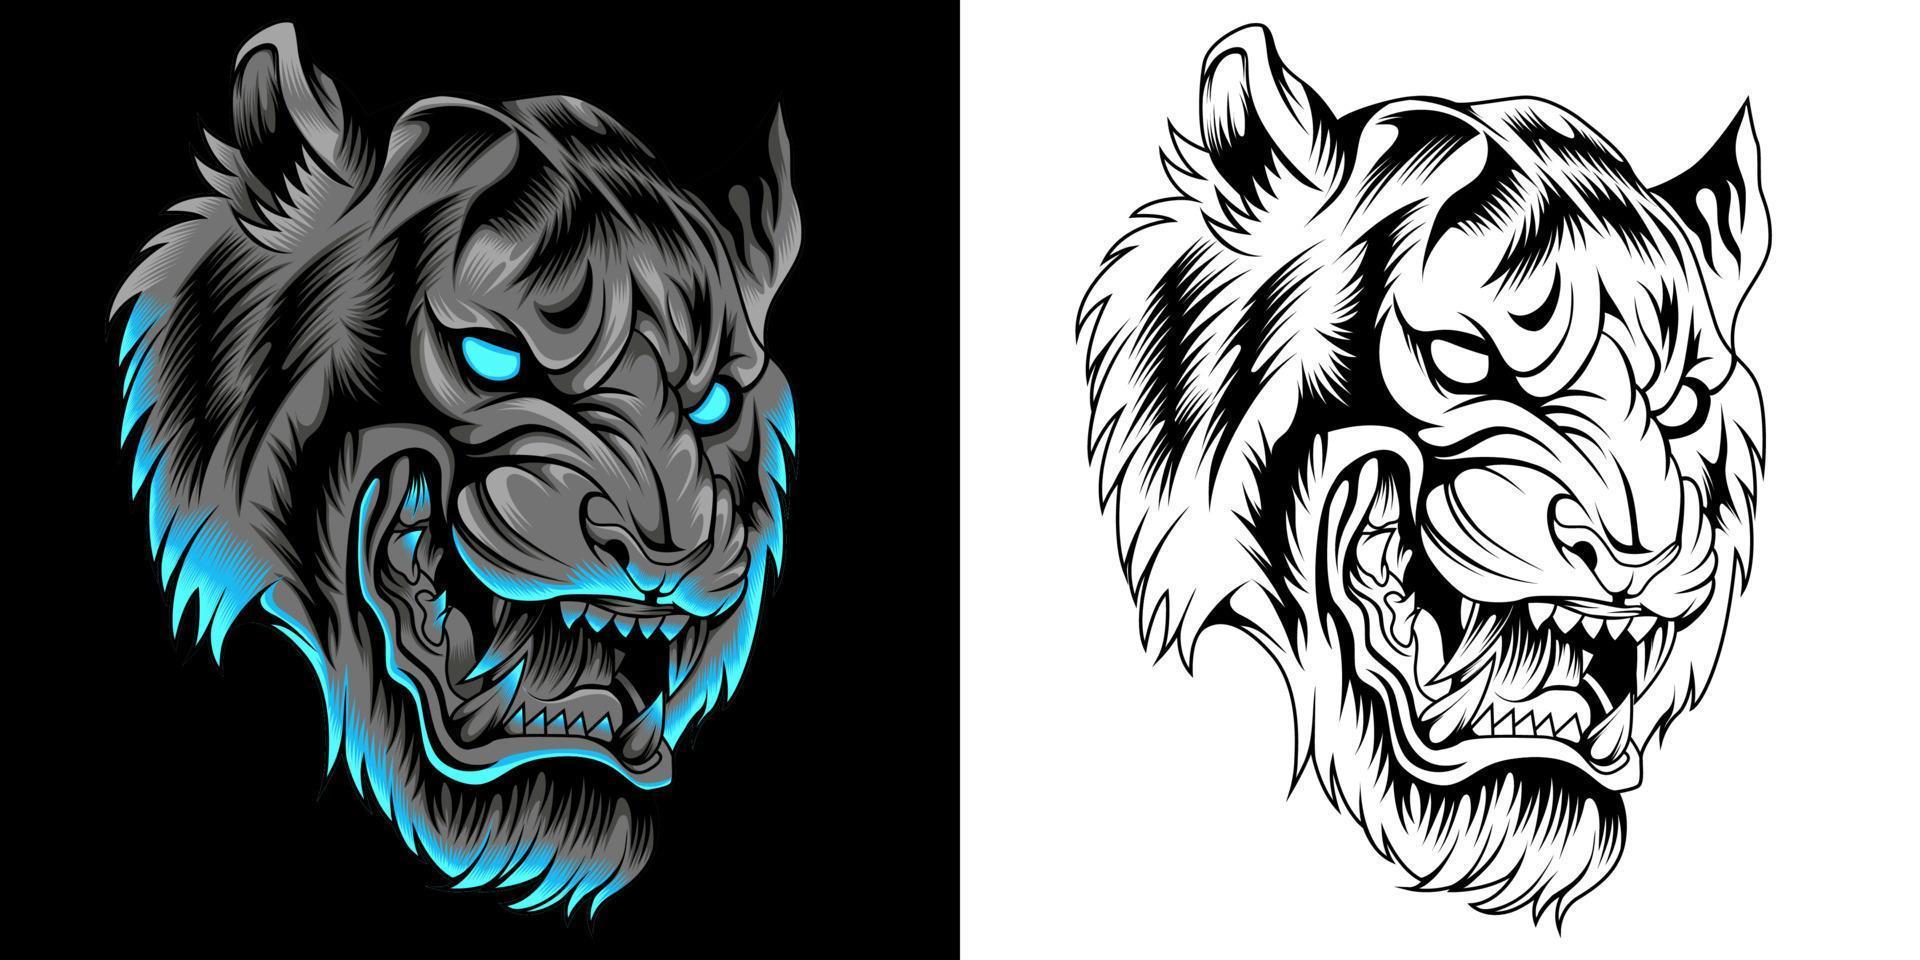 tiger head vector illustration in neon color style